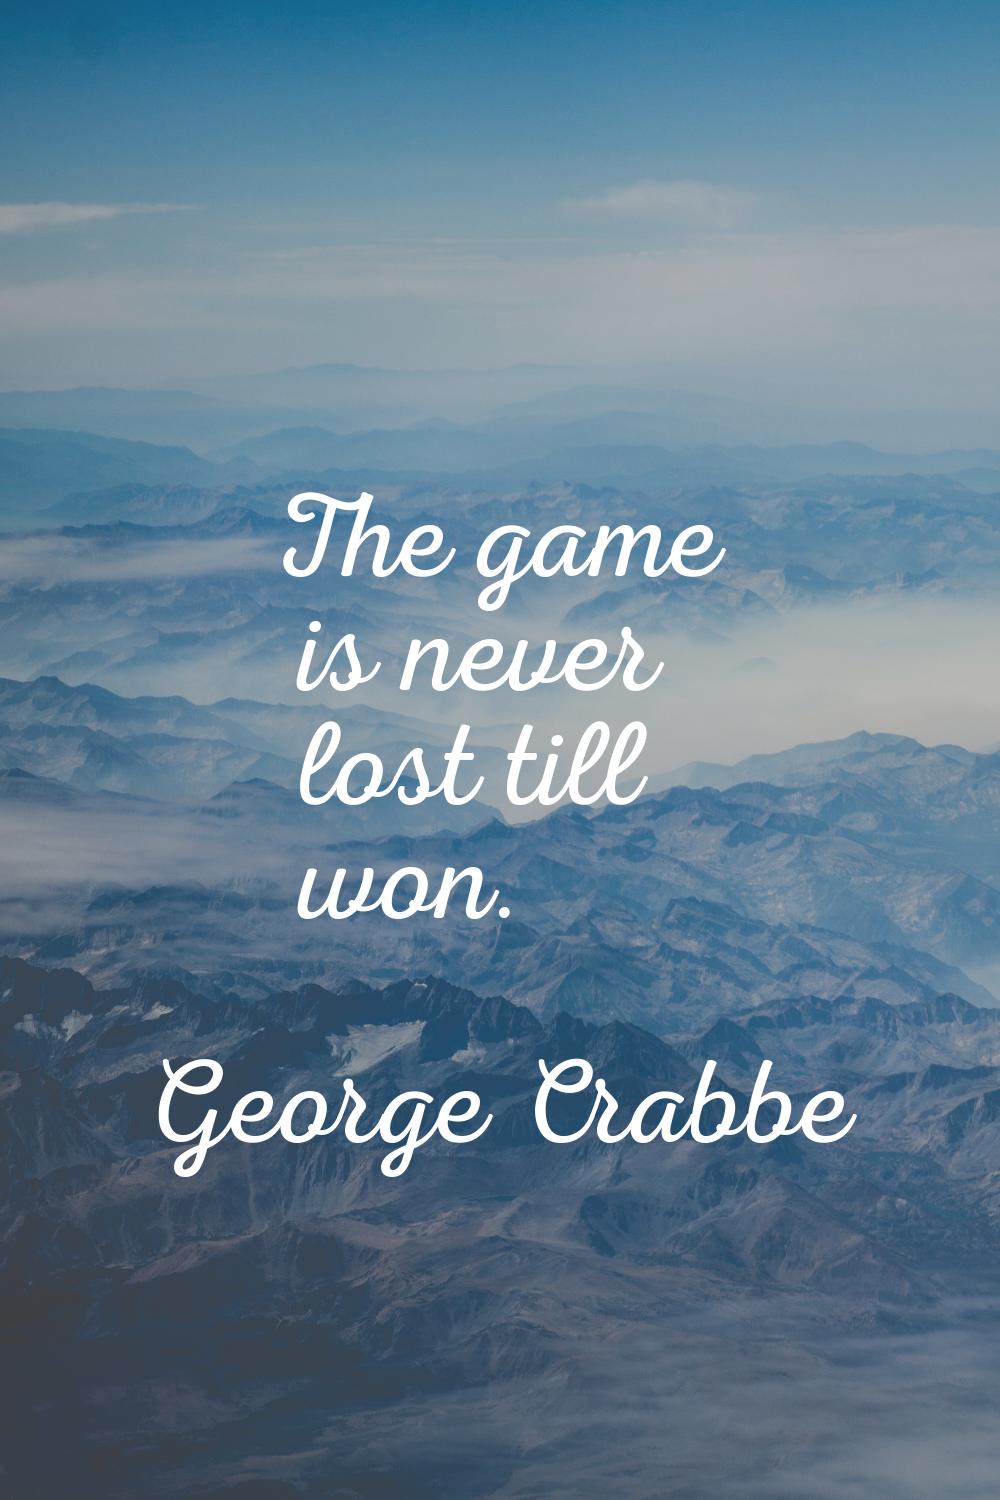 The game is never lost till won.